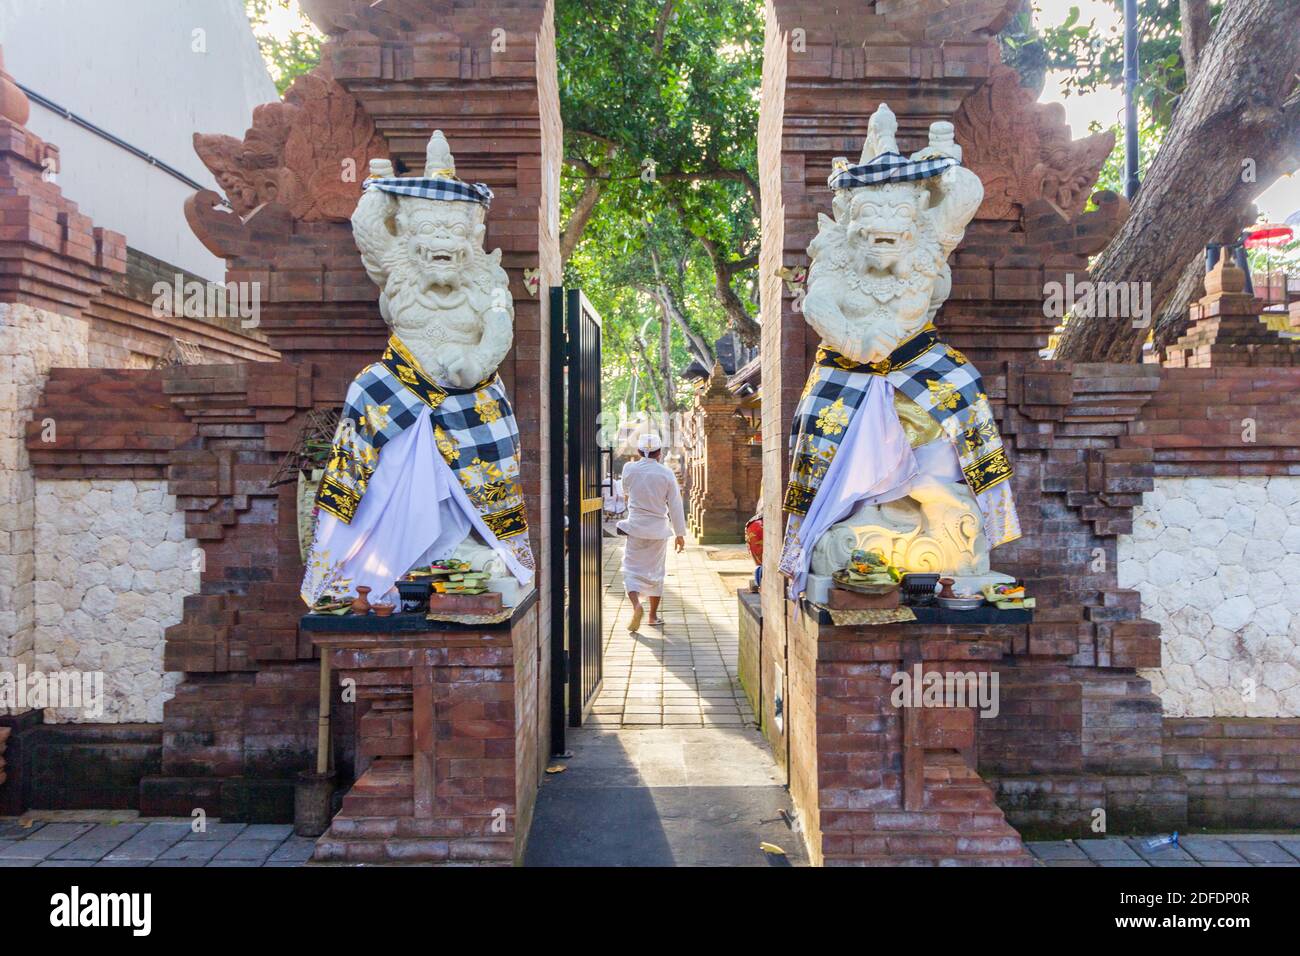 A candi bentar or split gate of a temple in Bali, Indonesia Stock Photo